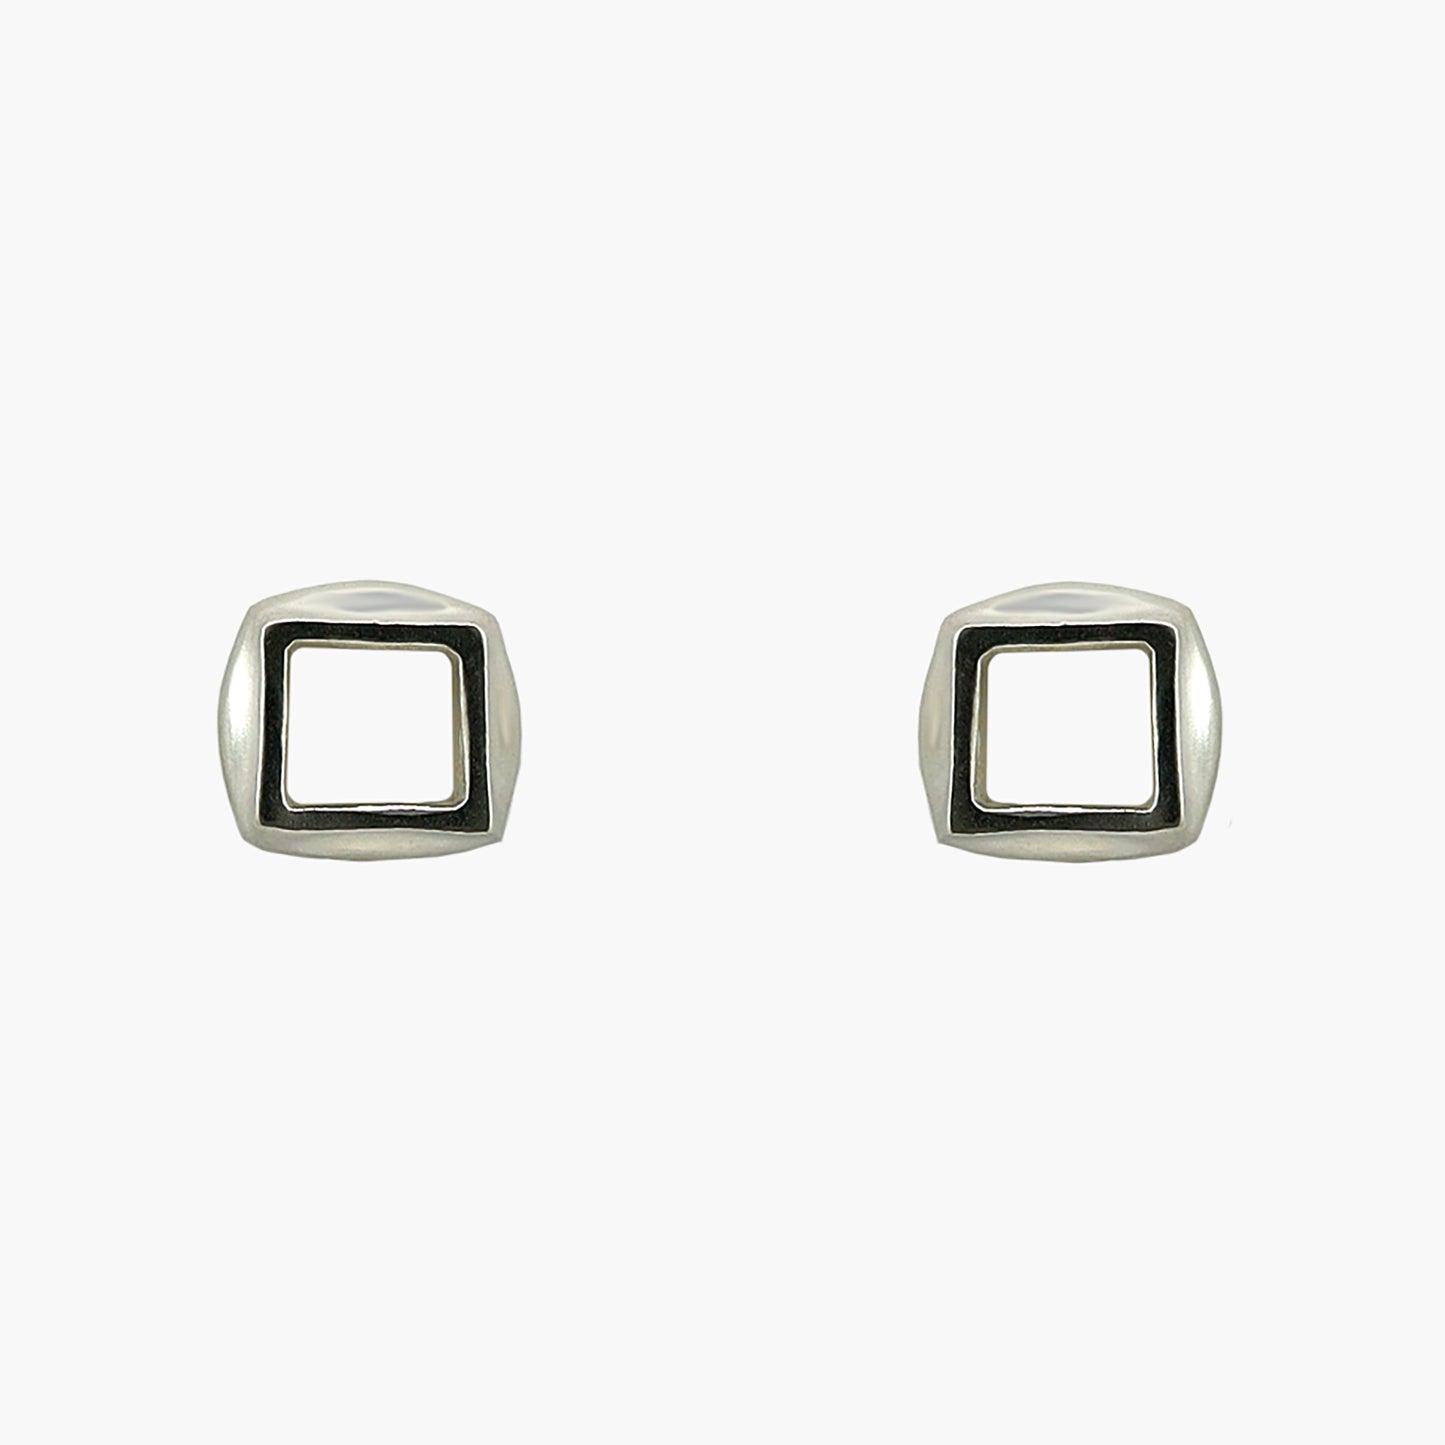 Sterling silver MANO earrings by Kim Paquet